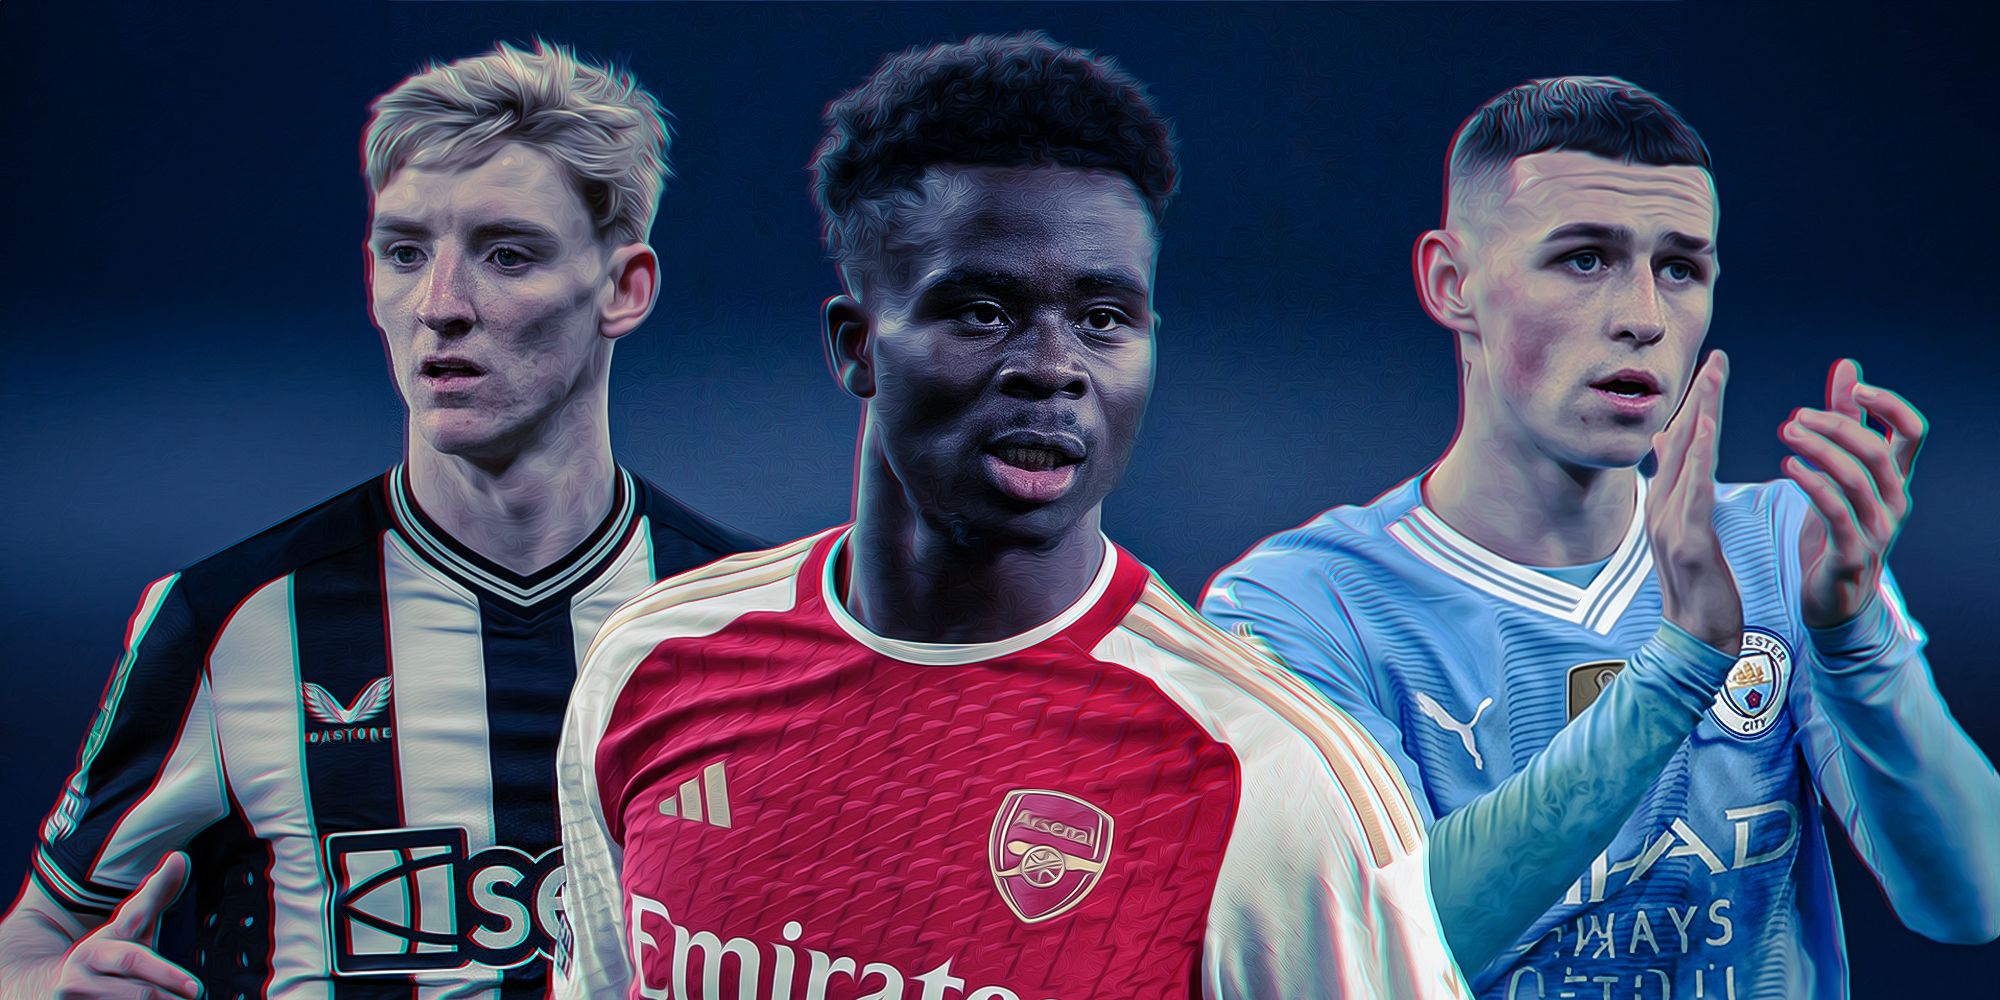 Themost-fouled-players-in-the-202324-Premier-League-season-after-Arsenal's-Saka-complaint---image